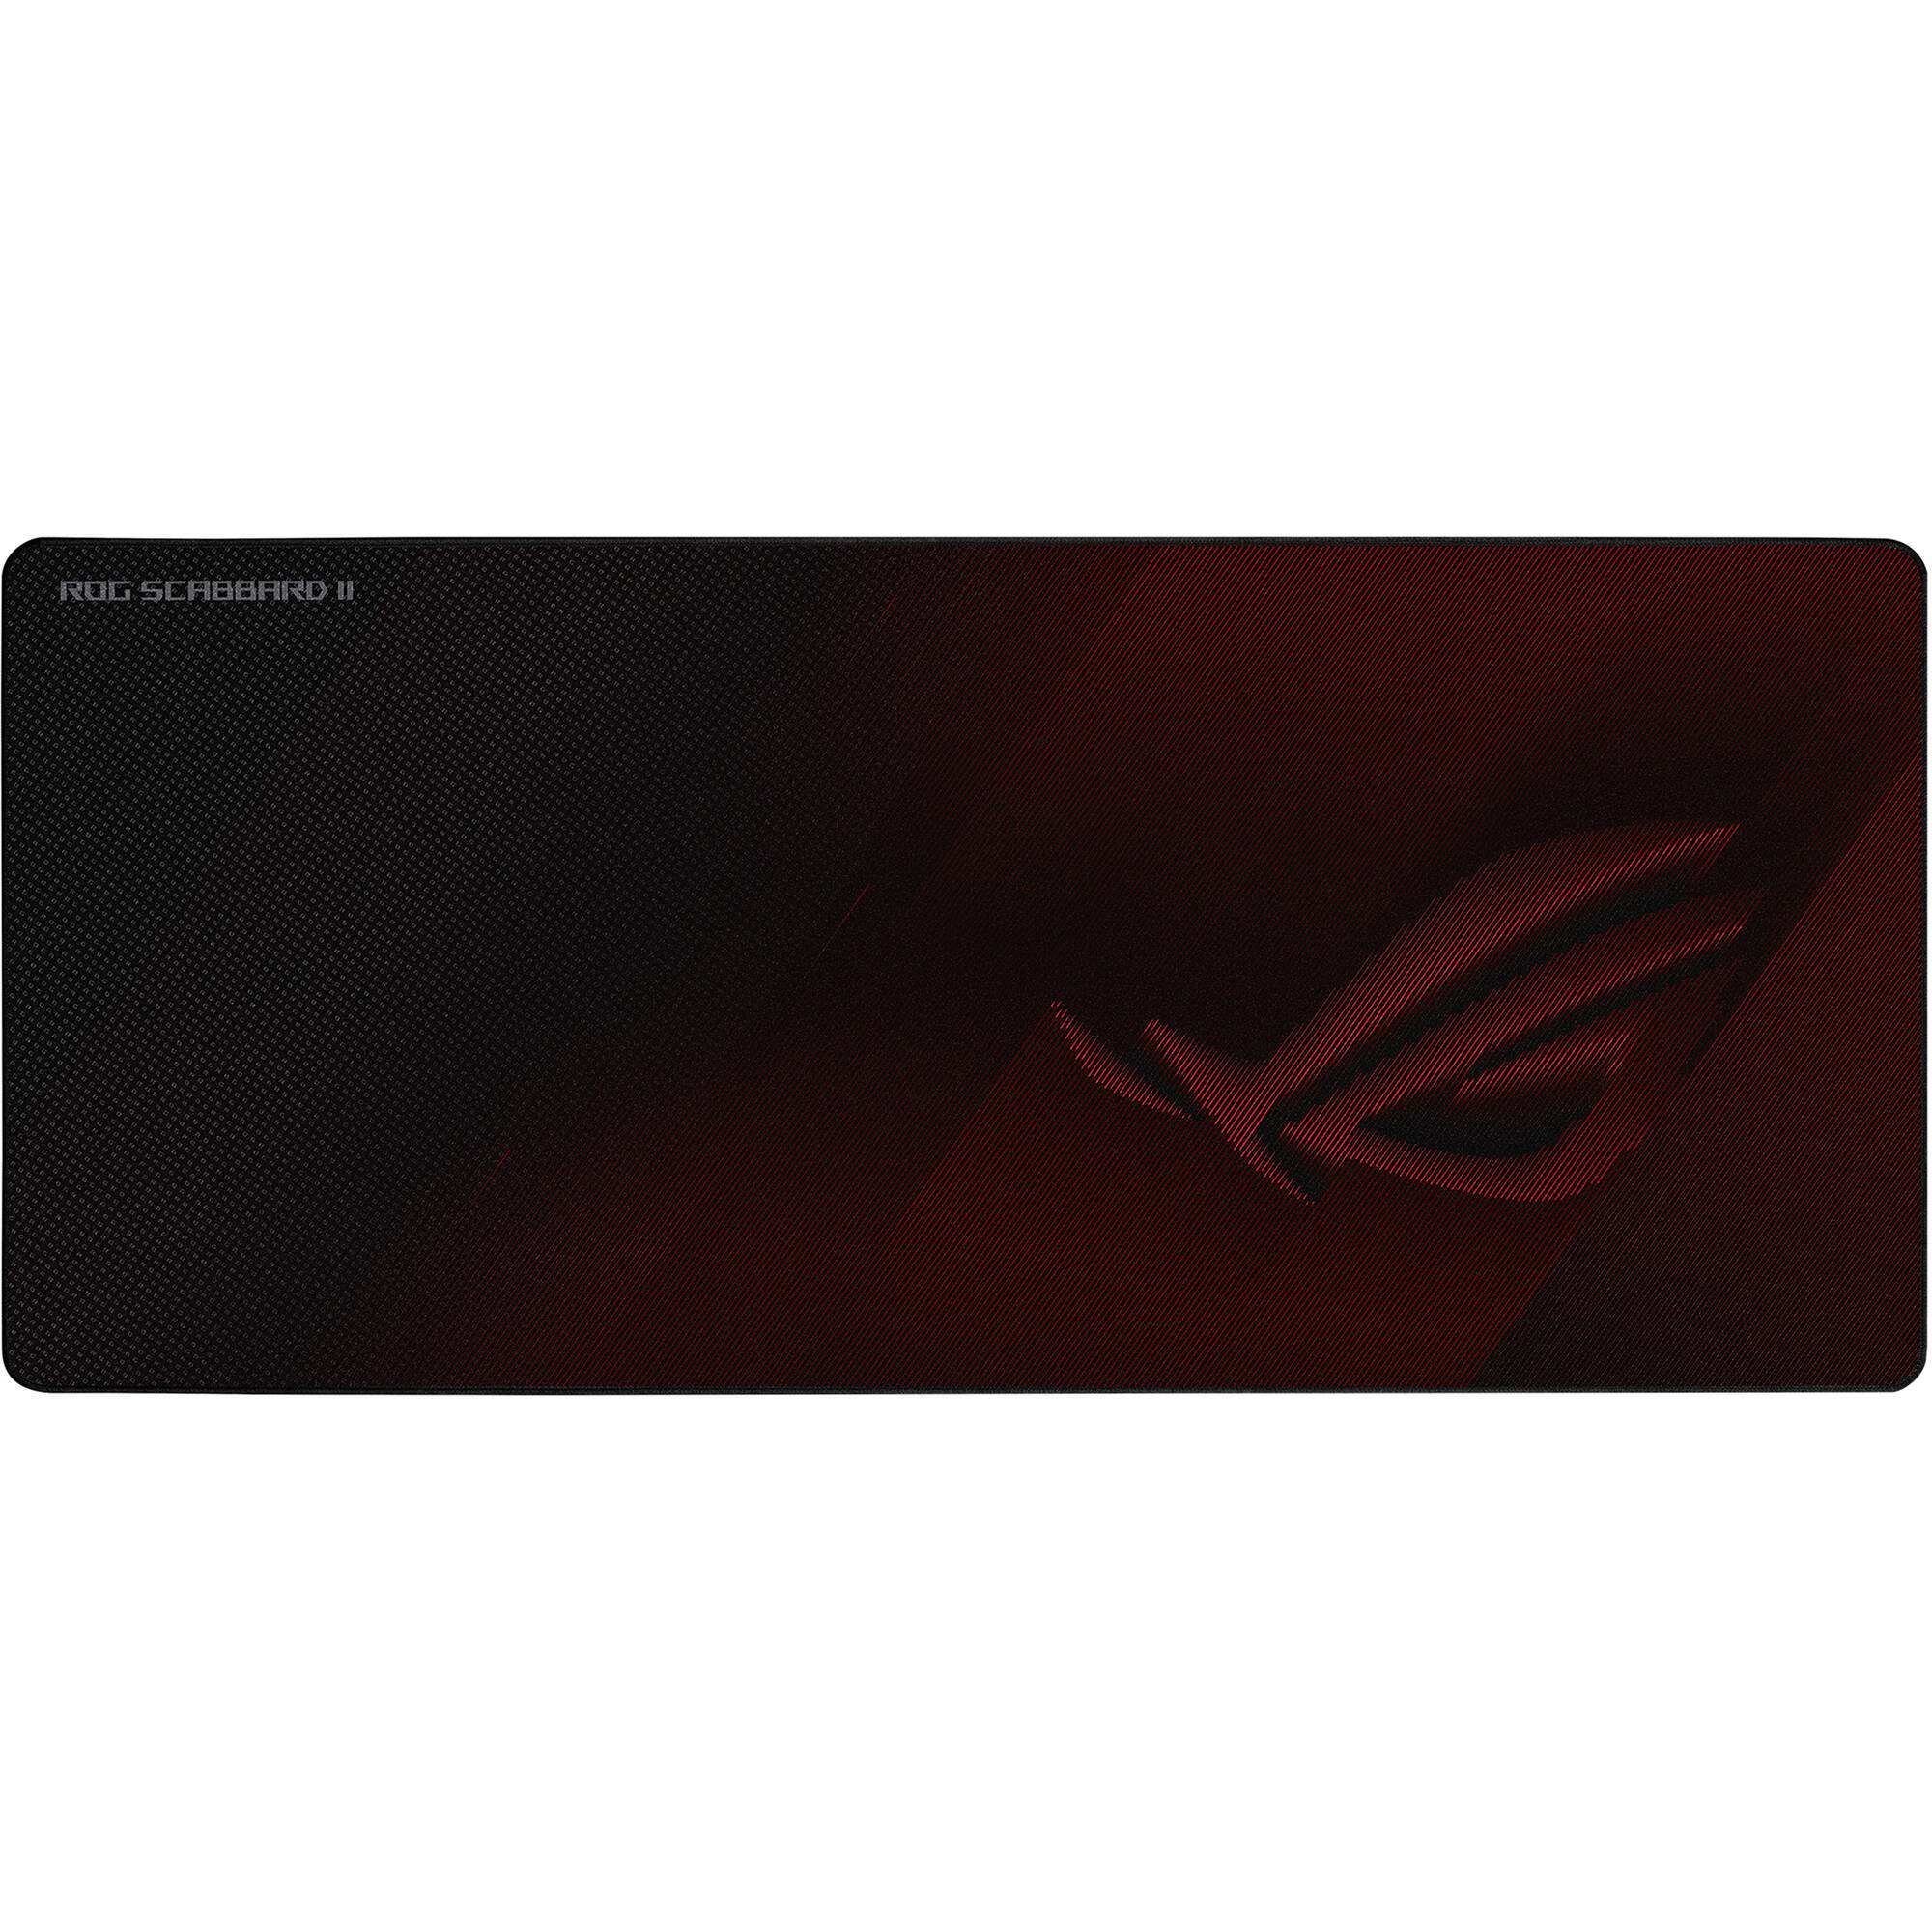 Asus Rog Scabbard Ii Extended Gaming Mouse Nc08 Rog Scabbard Ii